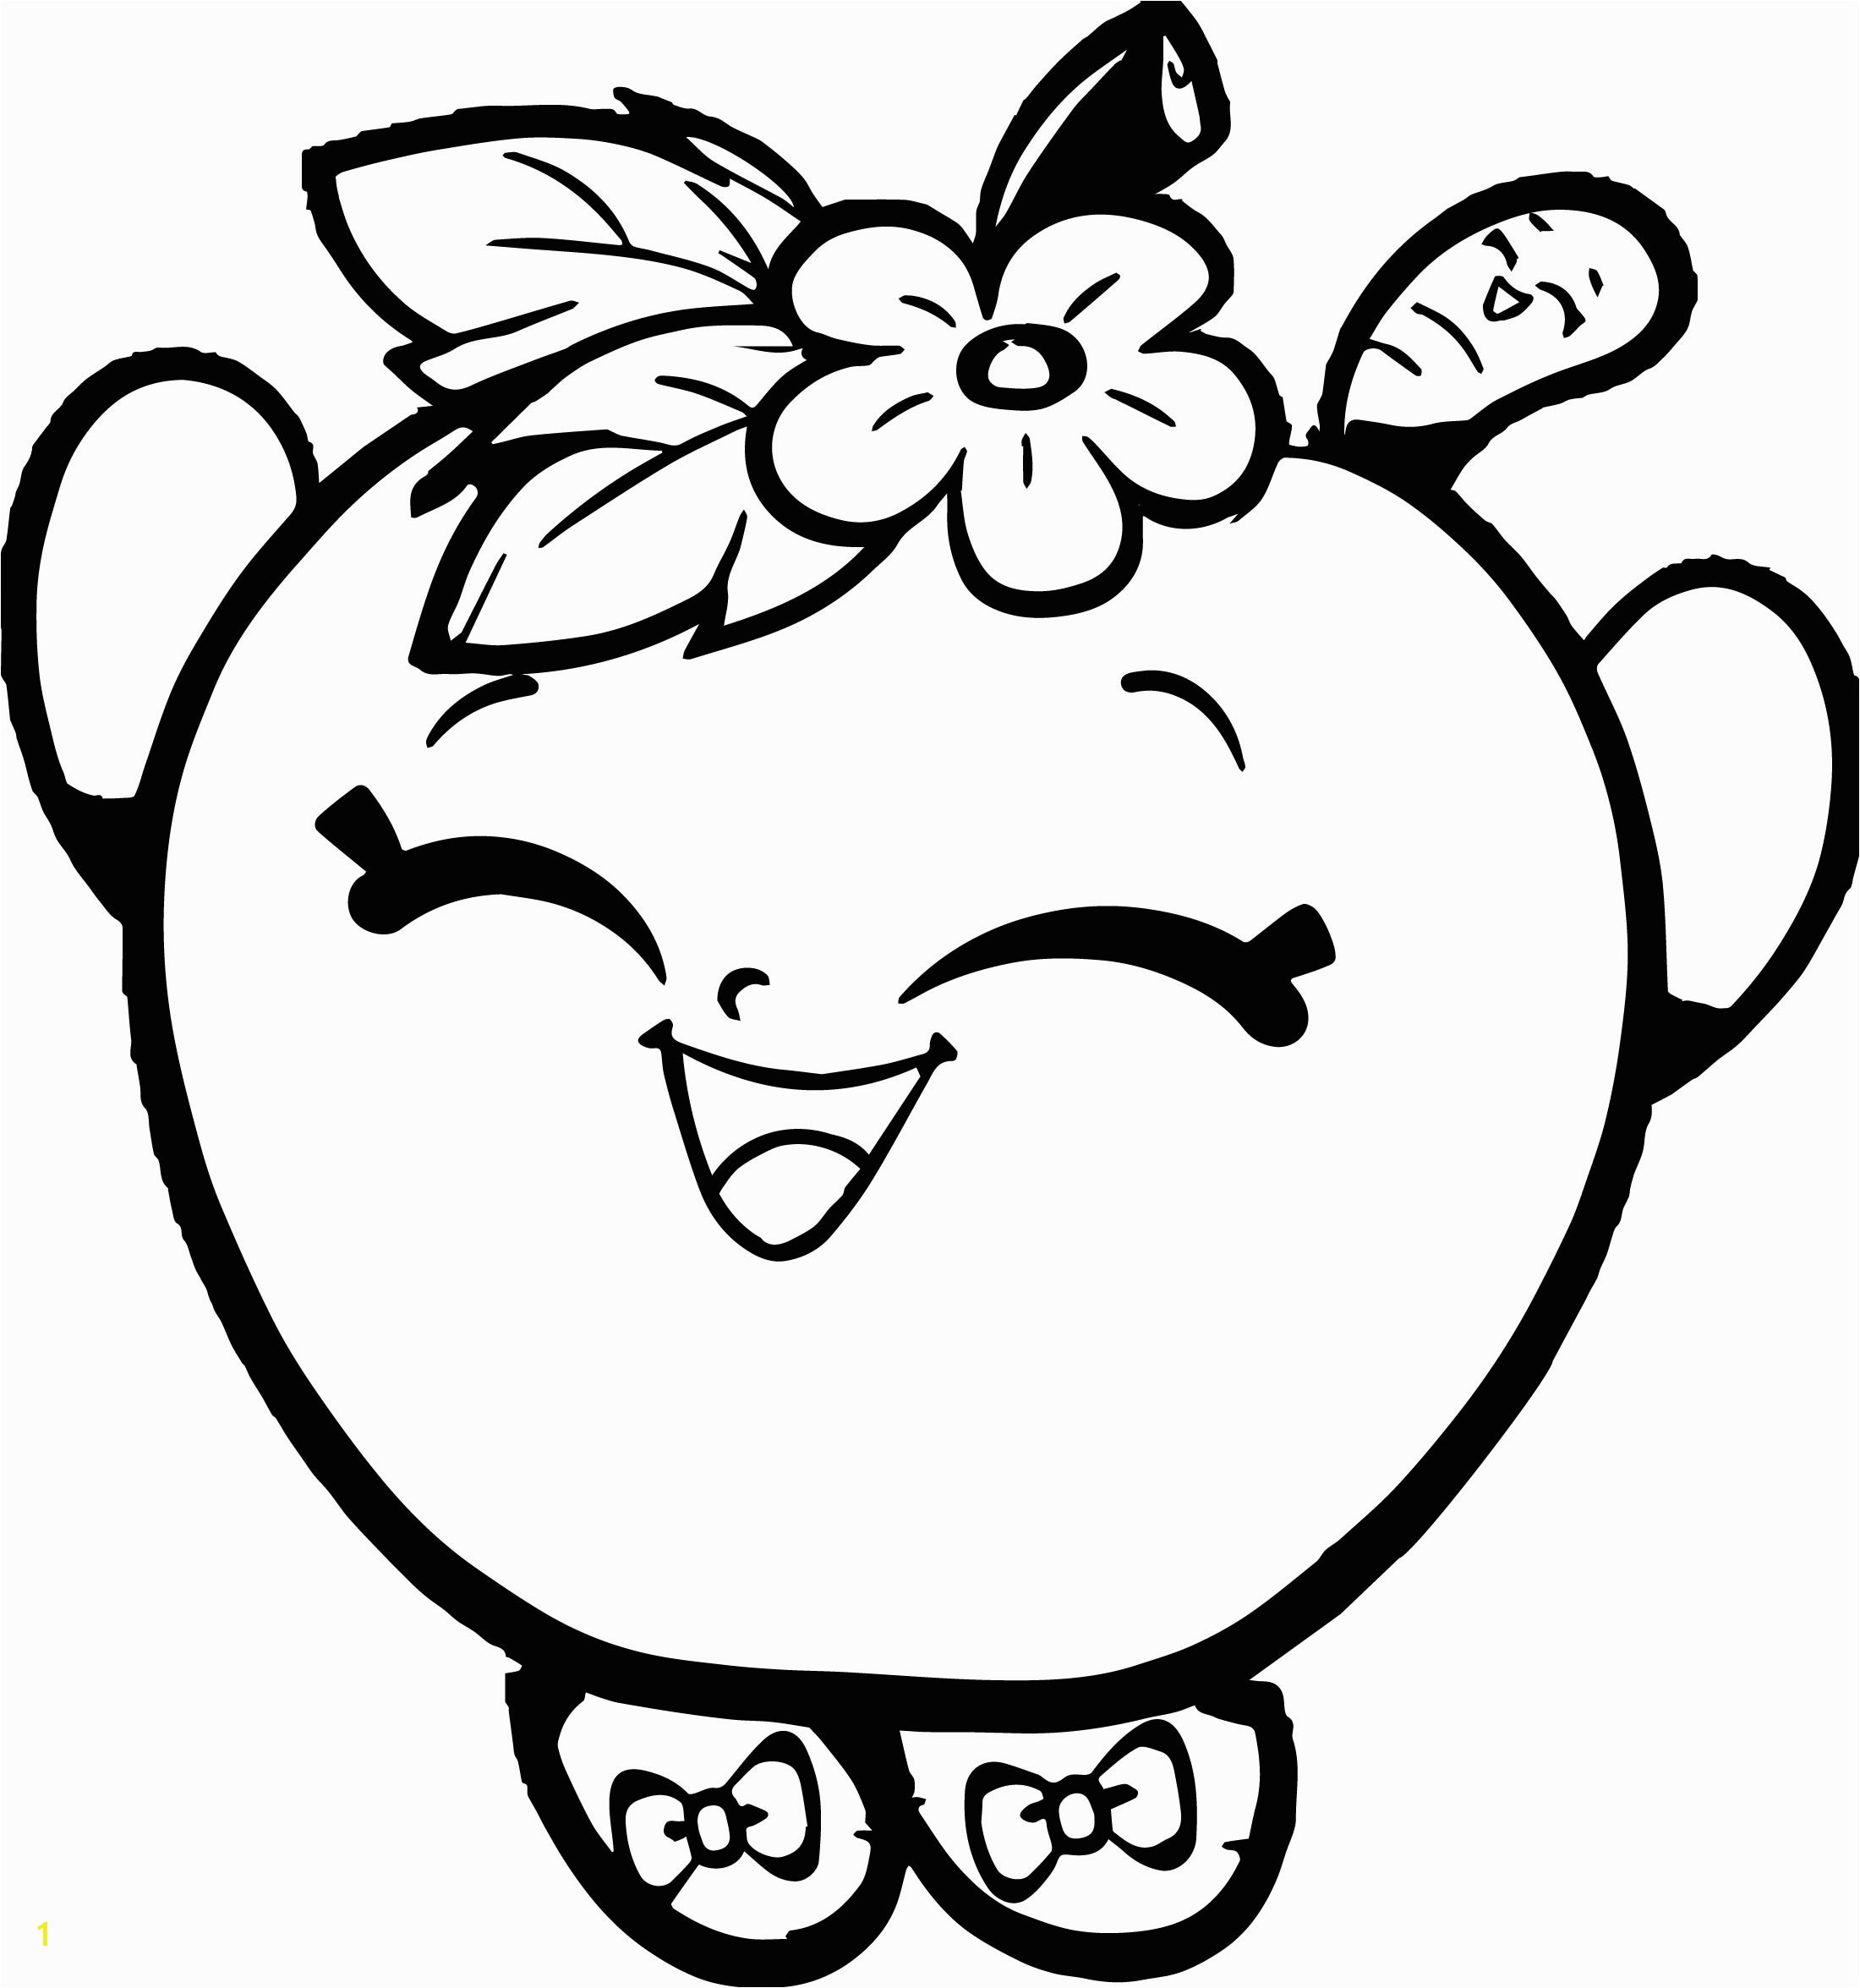 New shopkins coloring page APPLE BLOSSOM 1